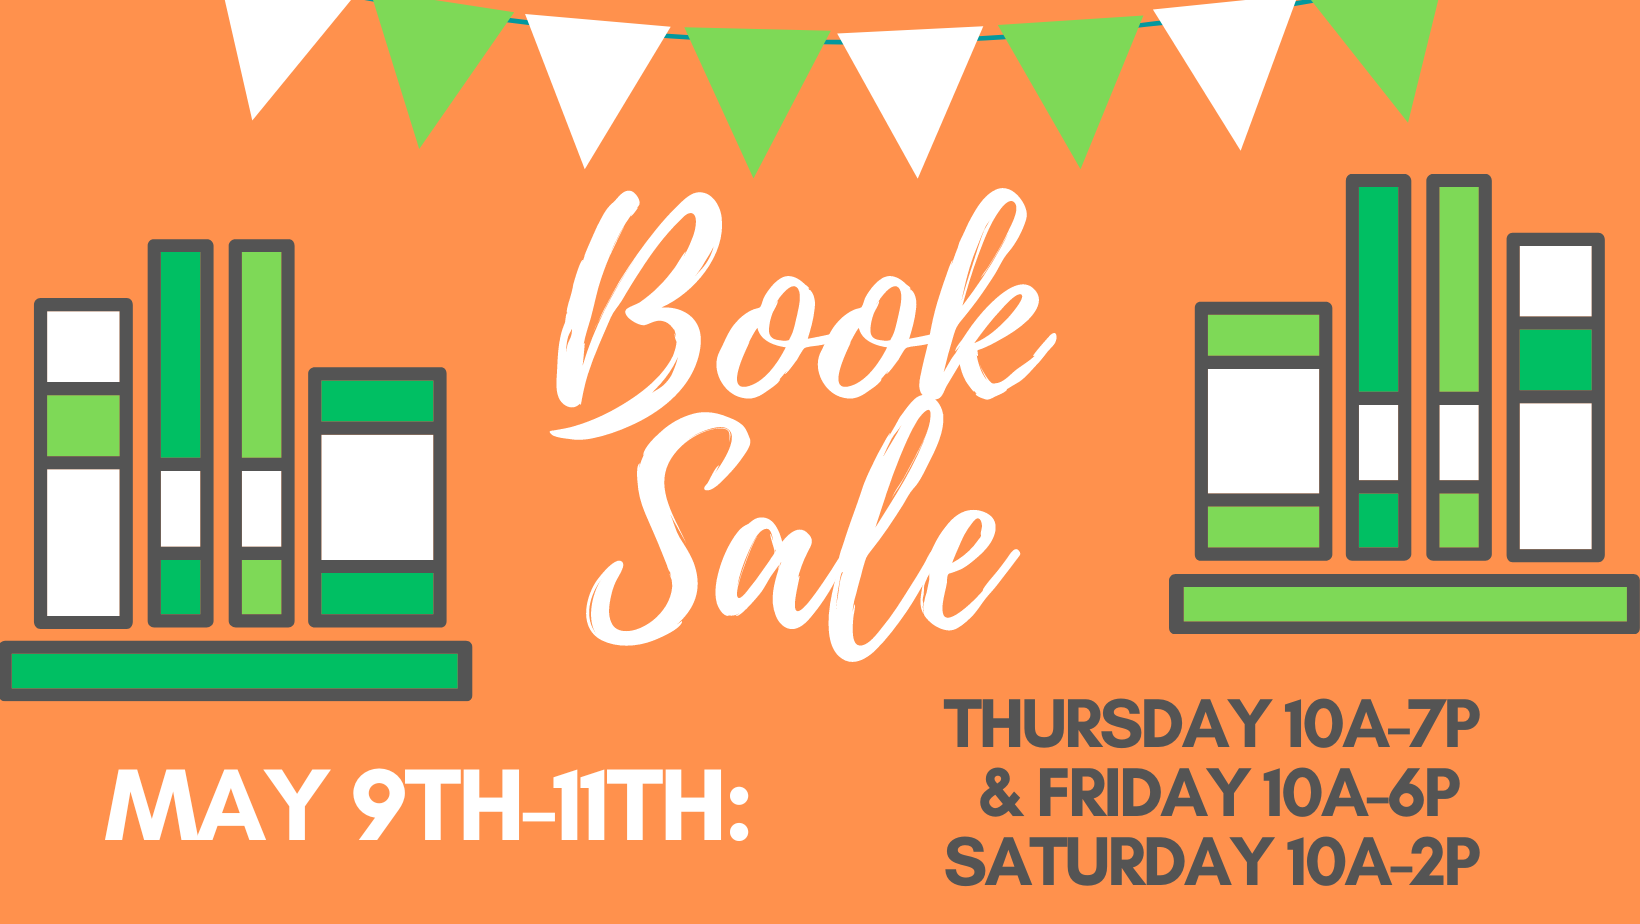 Book Sale May 9th-11th